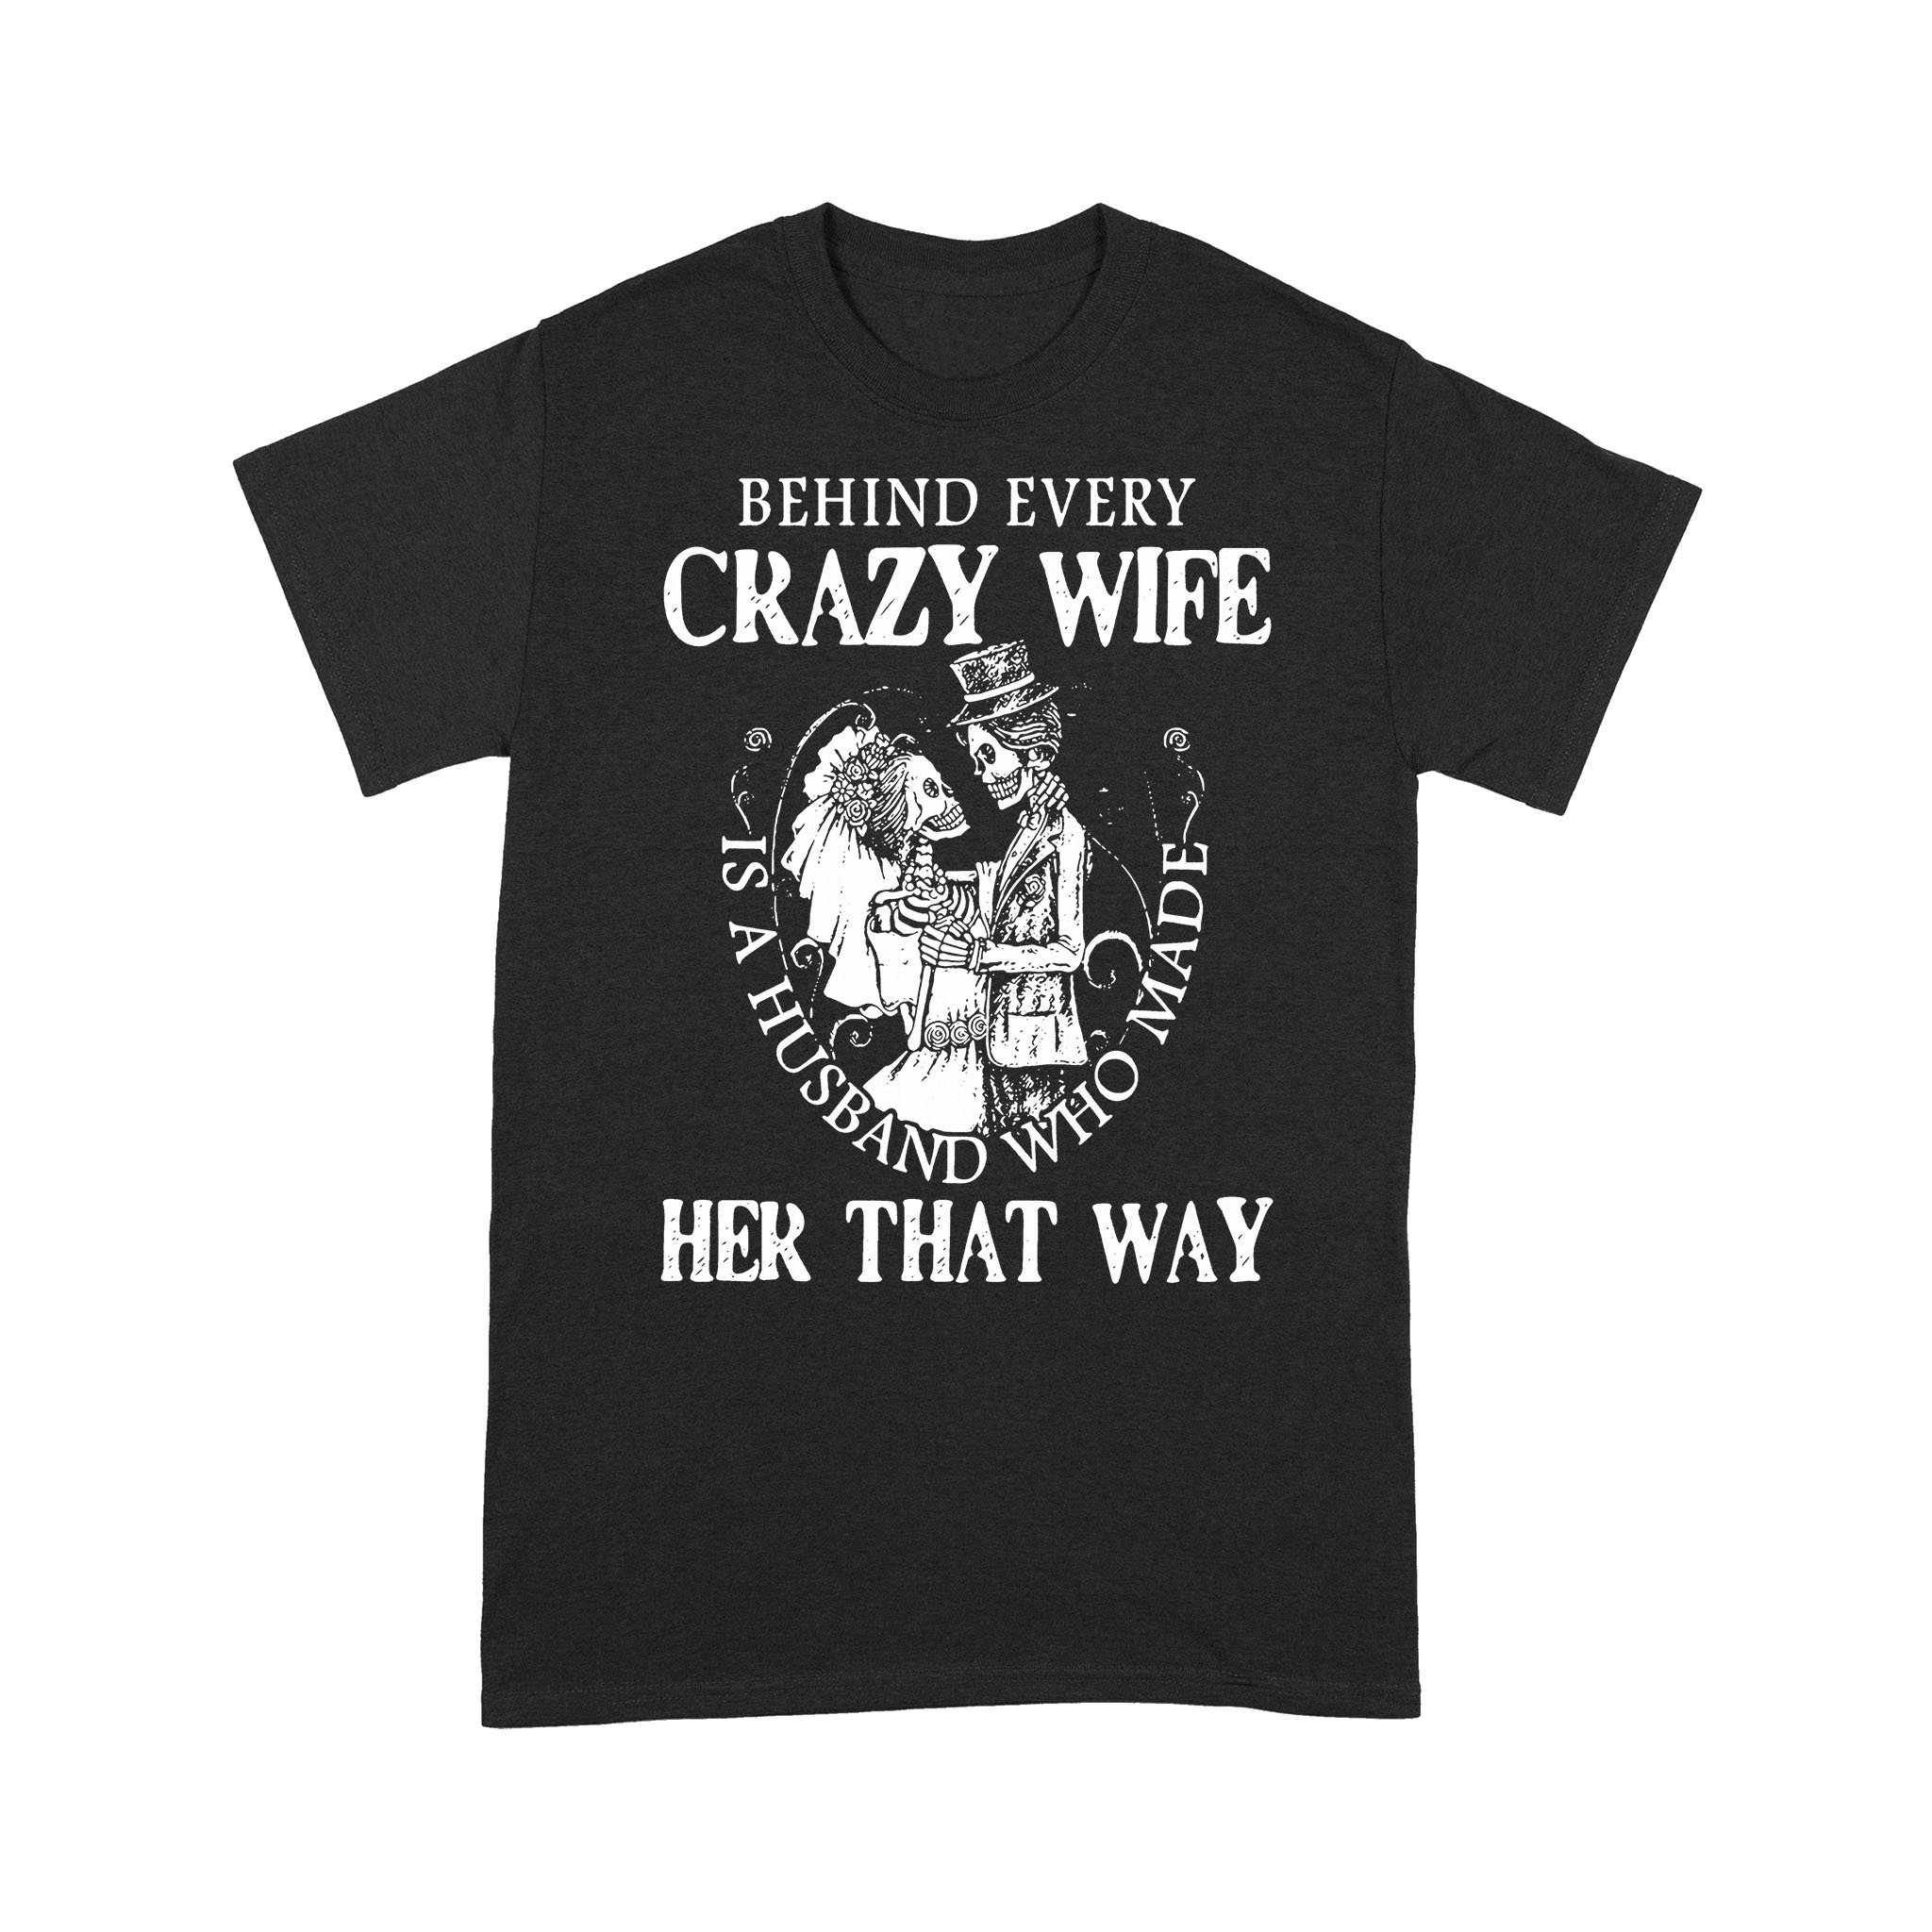 Behind Every Crazy Wife Is A Husband Who Made Her That Way Skeleton Marriage T-shirt